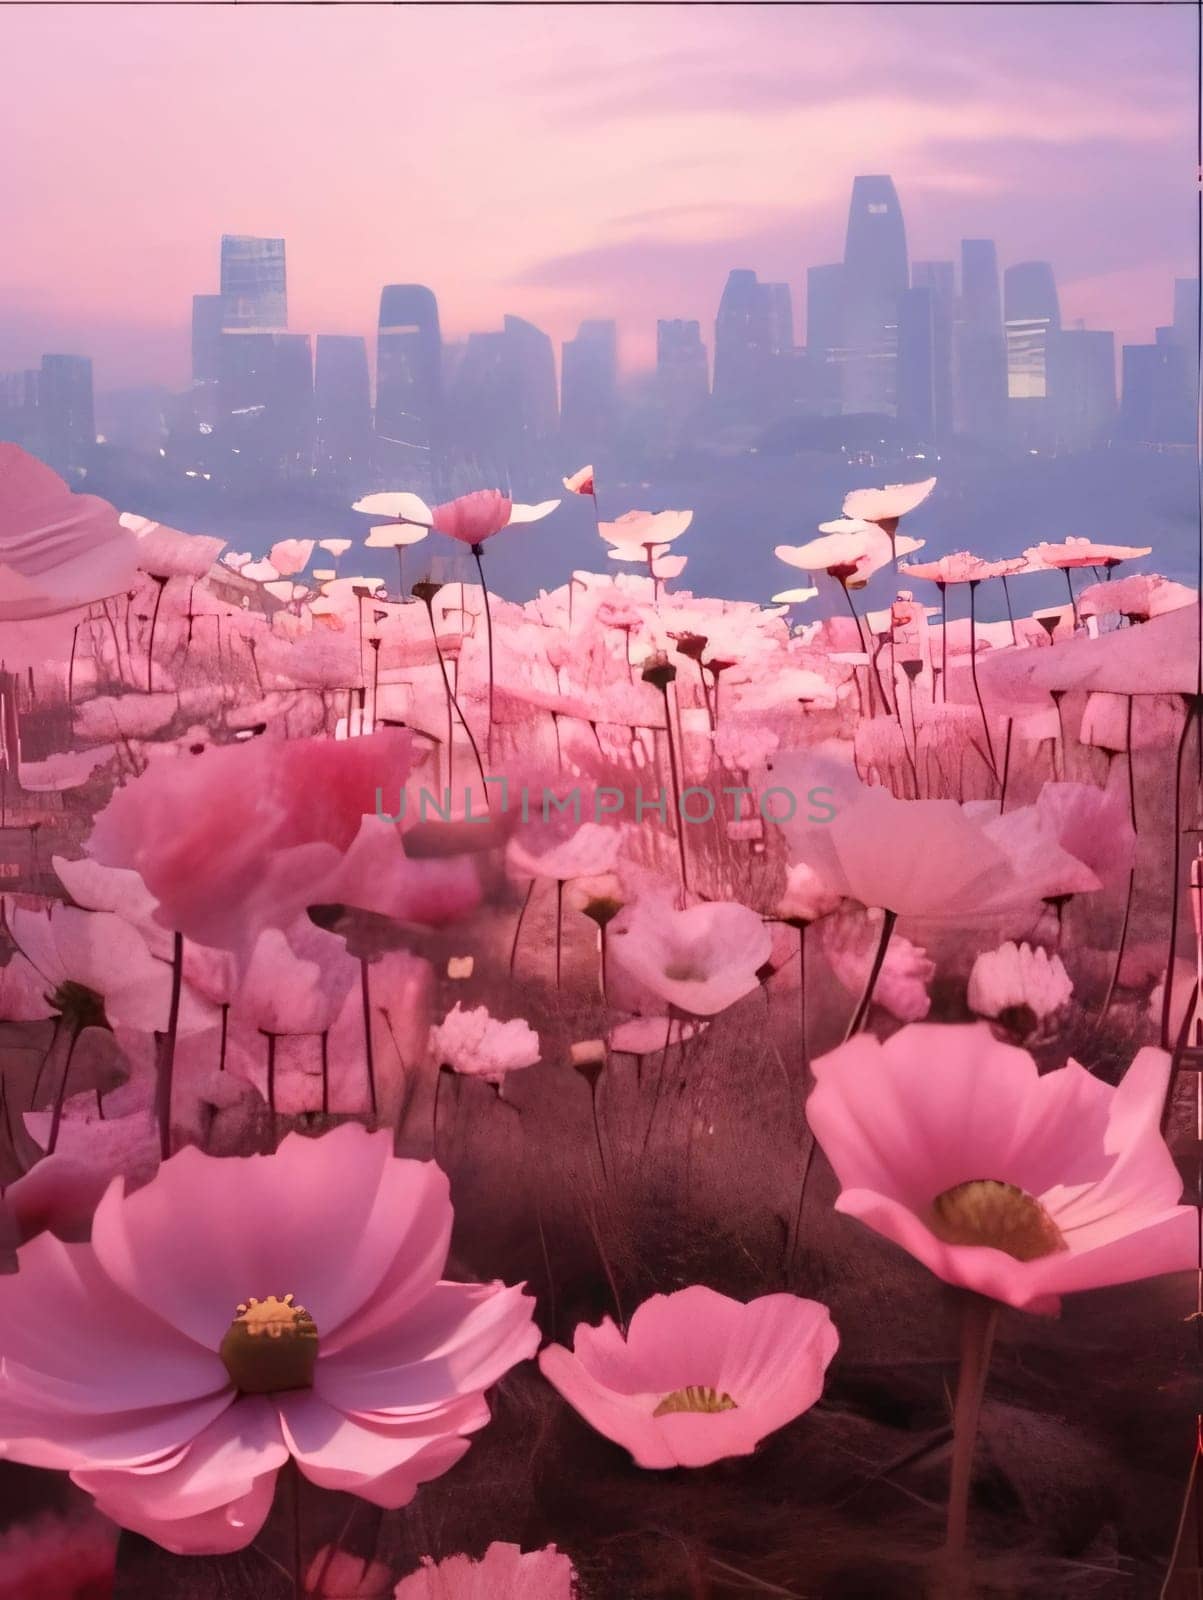 Field full of pink flowers in the background city skyline tall skyscrapers. Flowering flowers, a symbol of spring, new life. by ThemesS